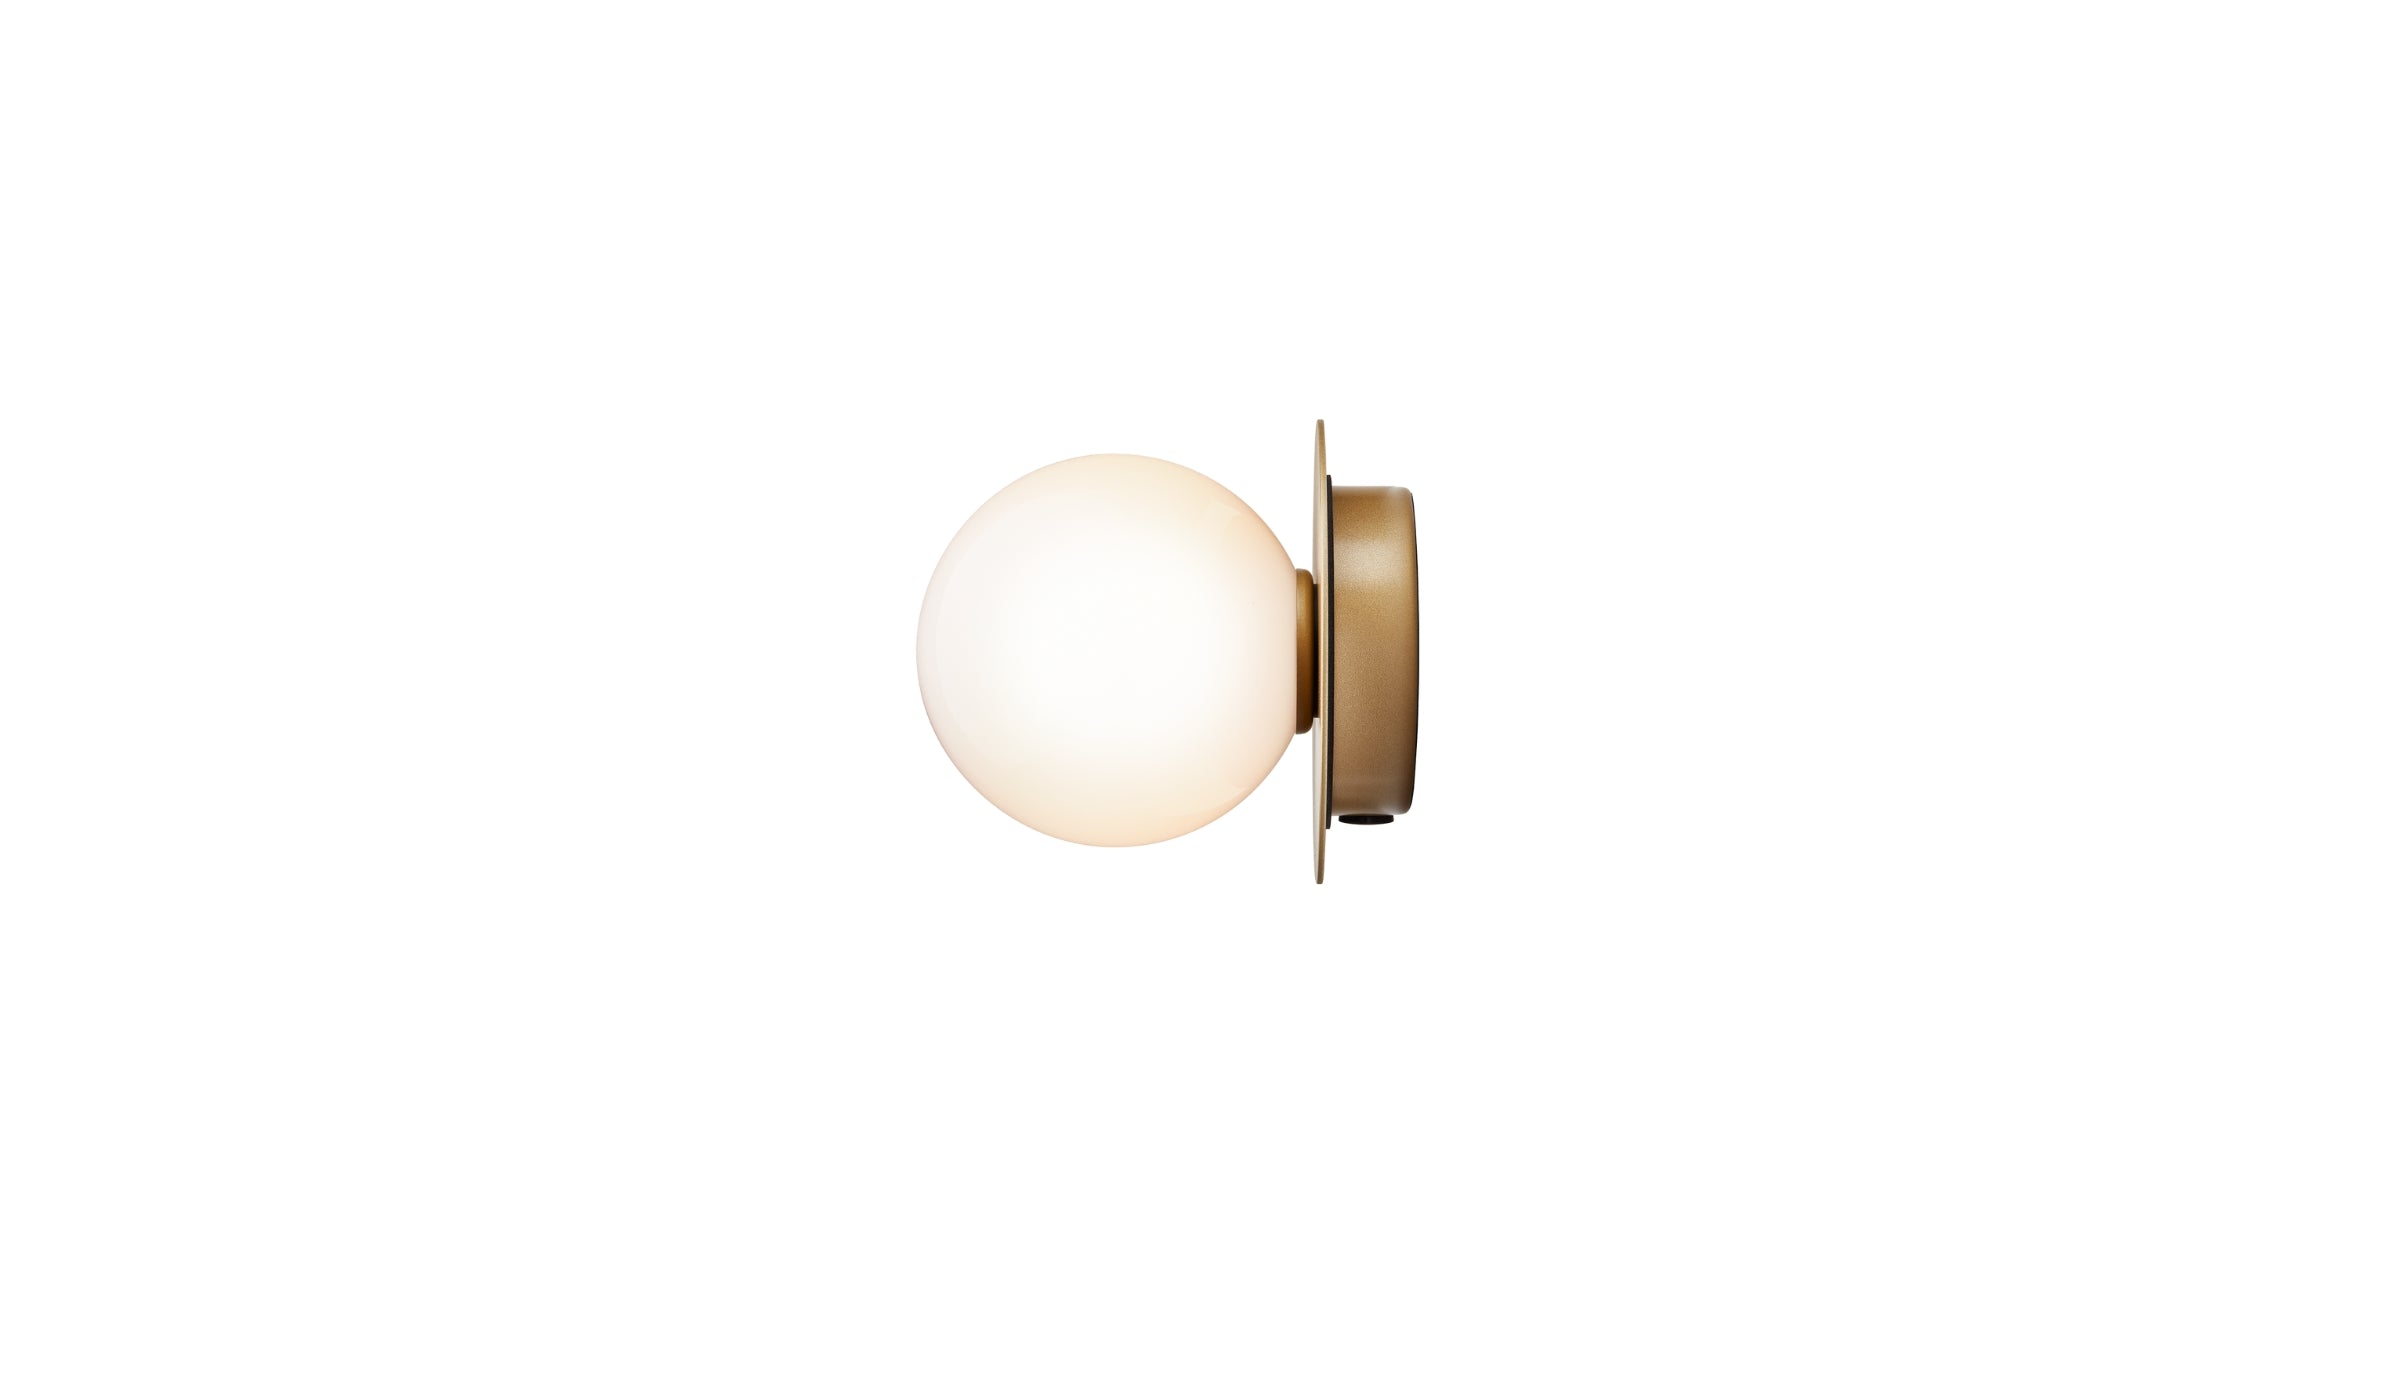 Liila 1 Small - Wall or ceiling light, opal white glass lampshade, Gold